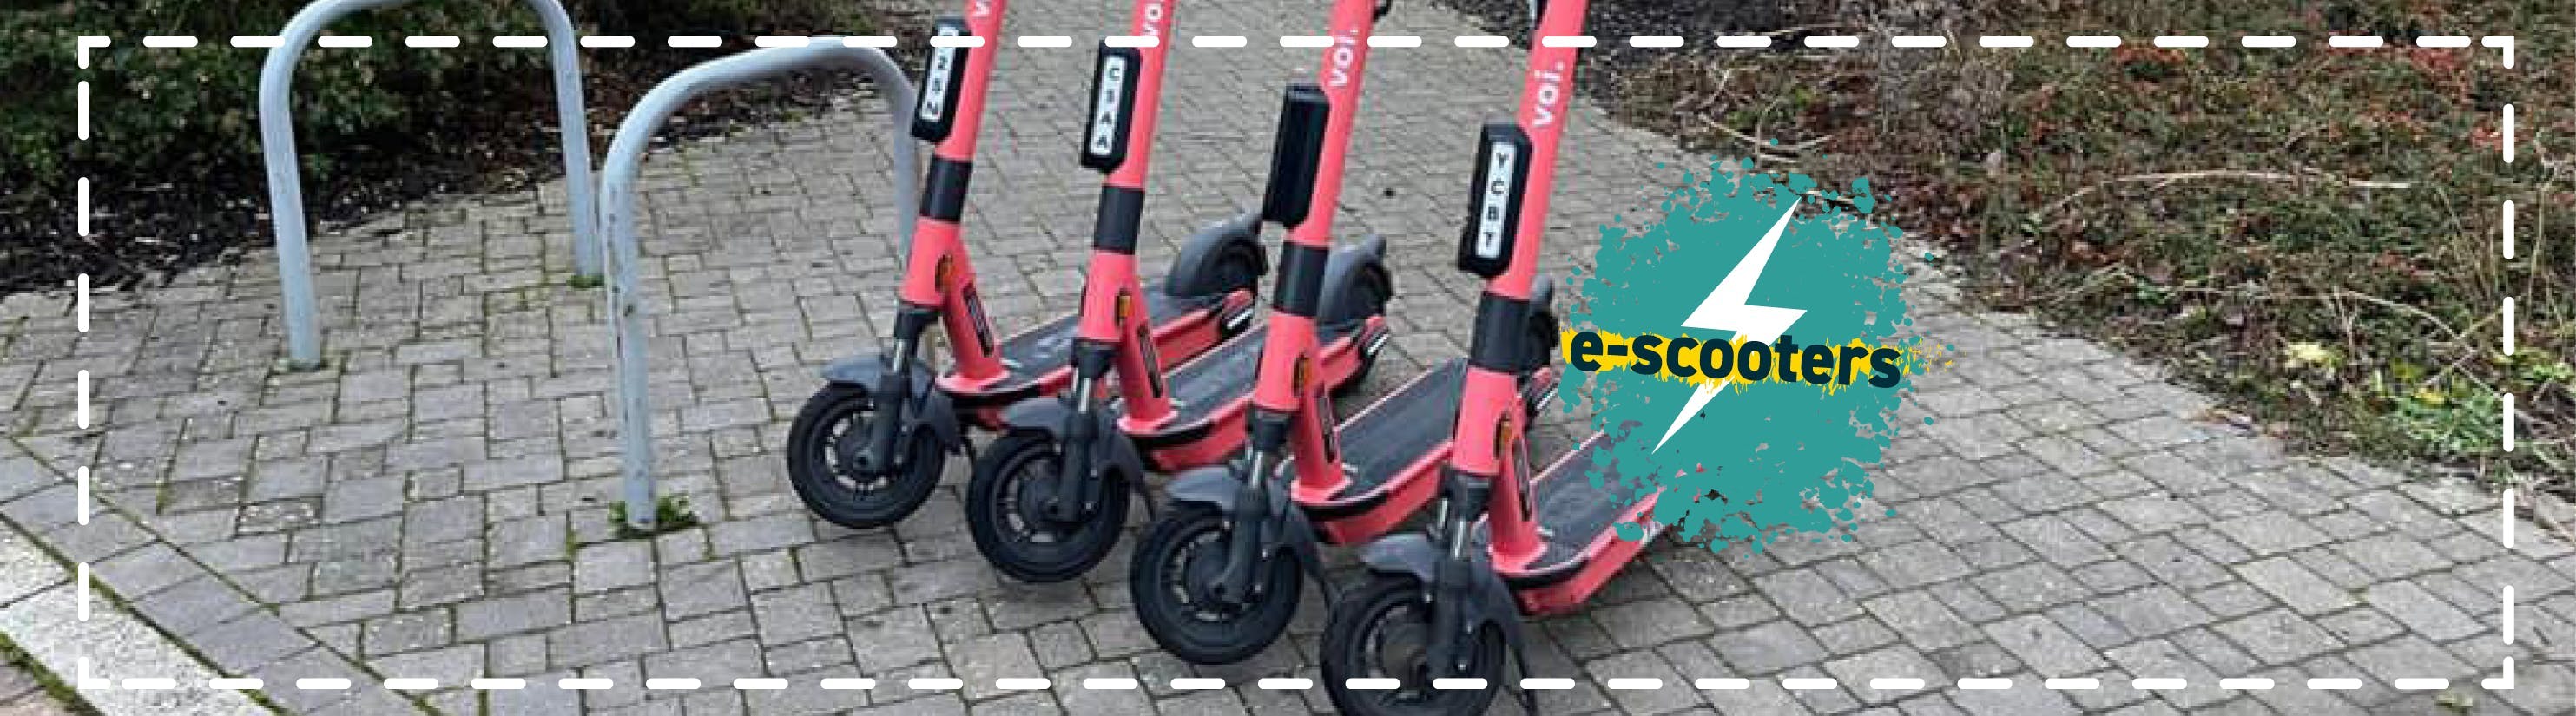 Photo of parked e-scooters.